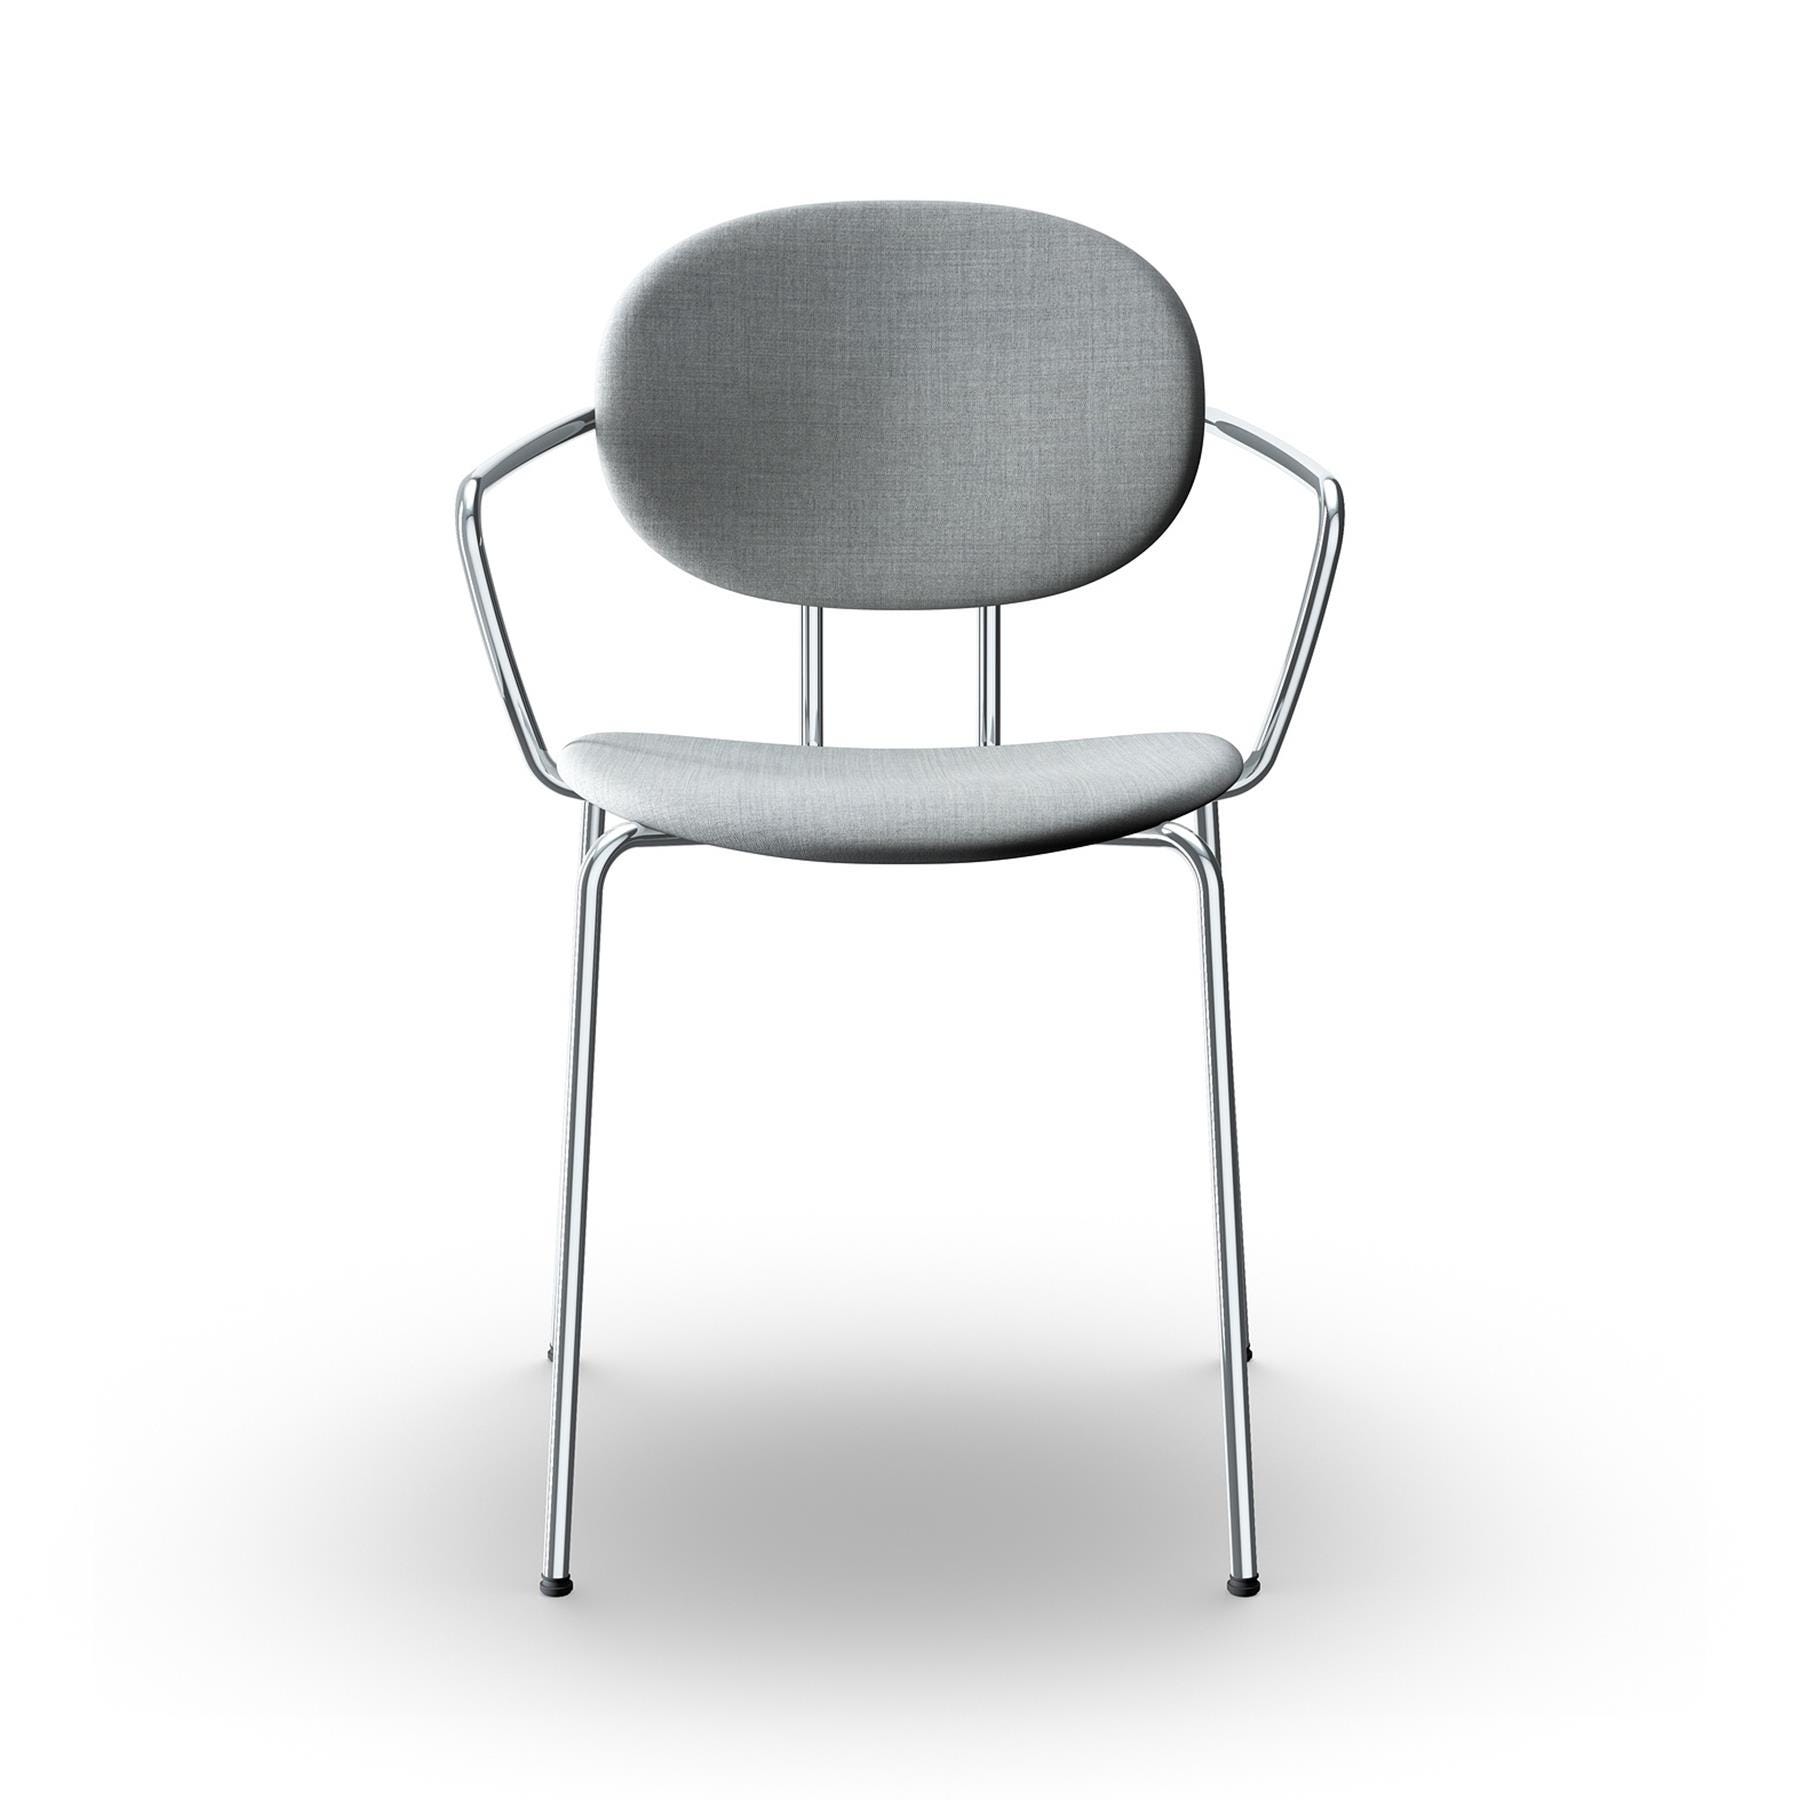 Sibast Piet Hein Dining Chair Fully Upholstered With Arms Chrome Remix 123 Grey Designer Furniture From Holloways Of Ludlow